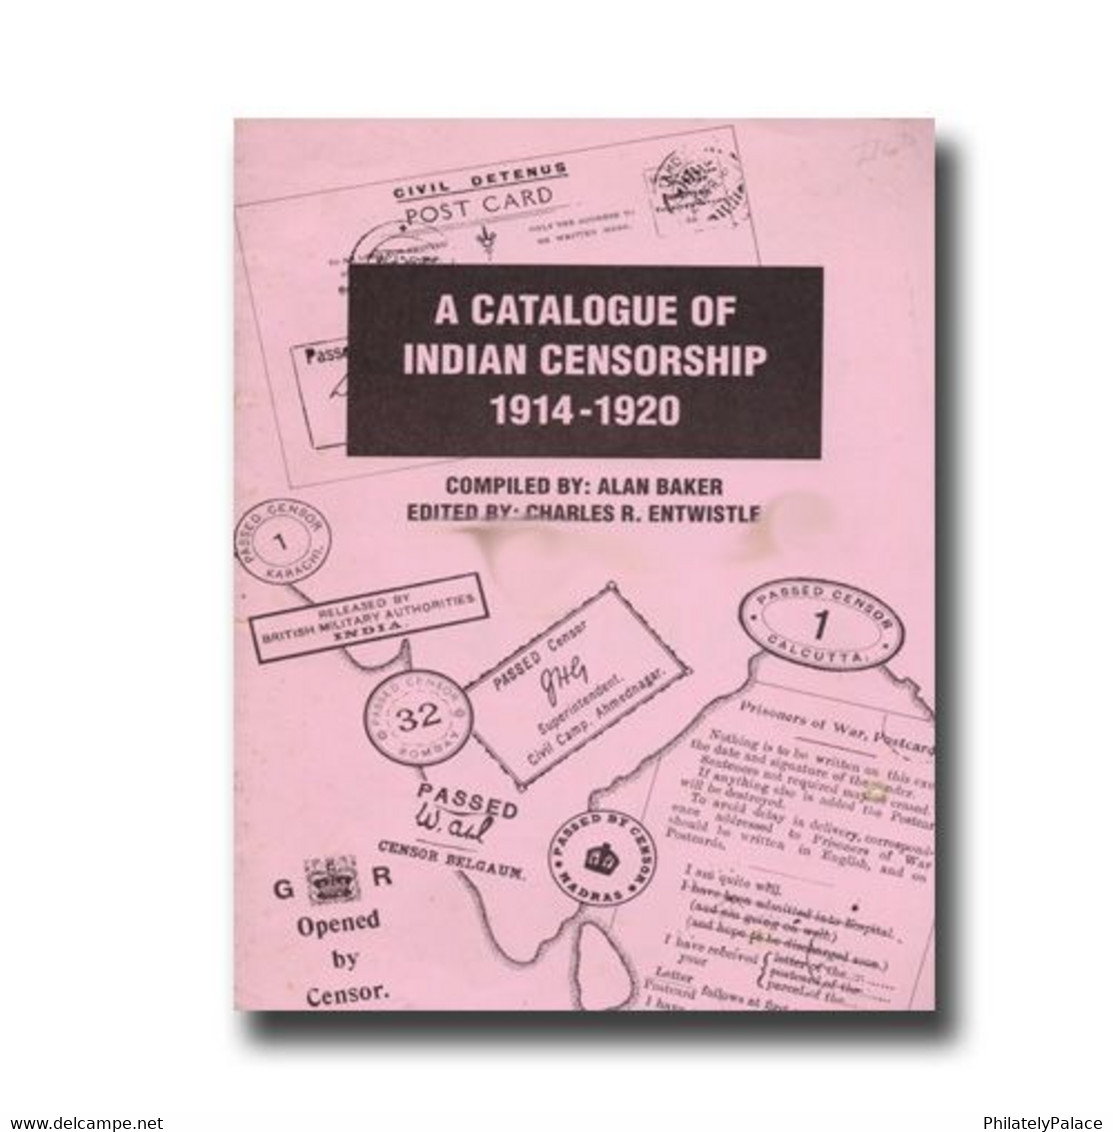 A Catalogue Of Indian Censorship  By Alan Baker & Charles R. Entwistle Paper Back (**) Limited Issue - Filatelia E Historia De Correos